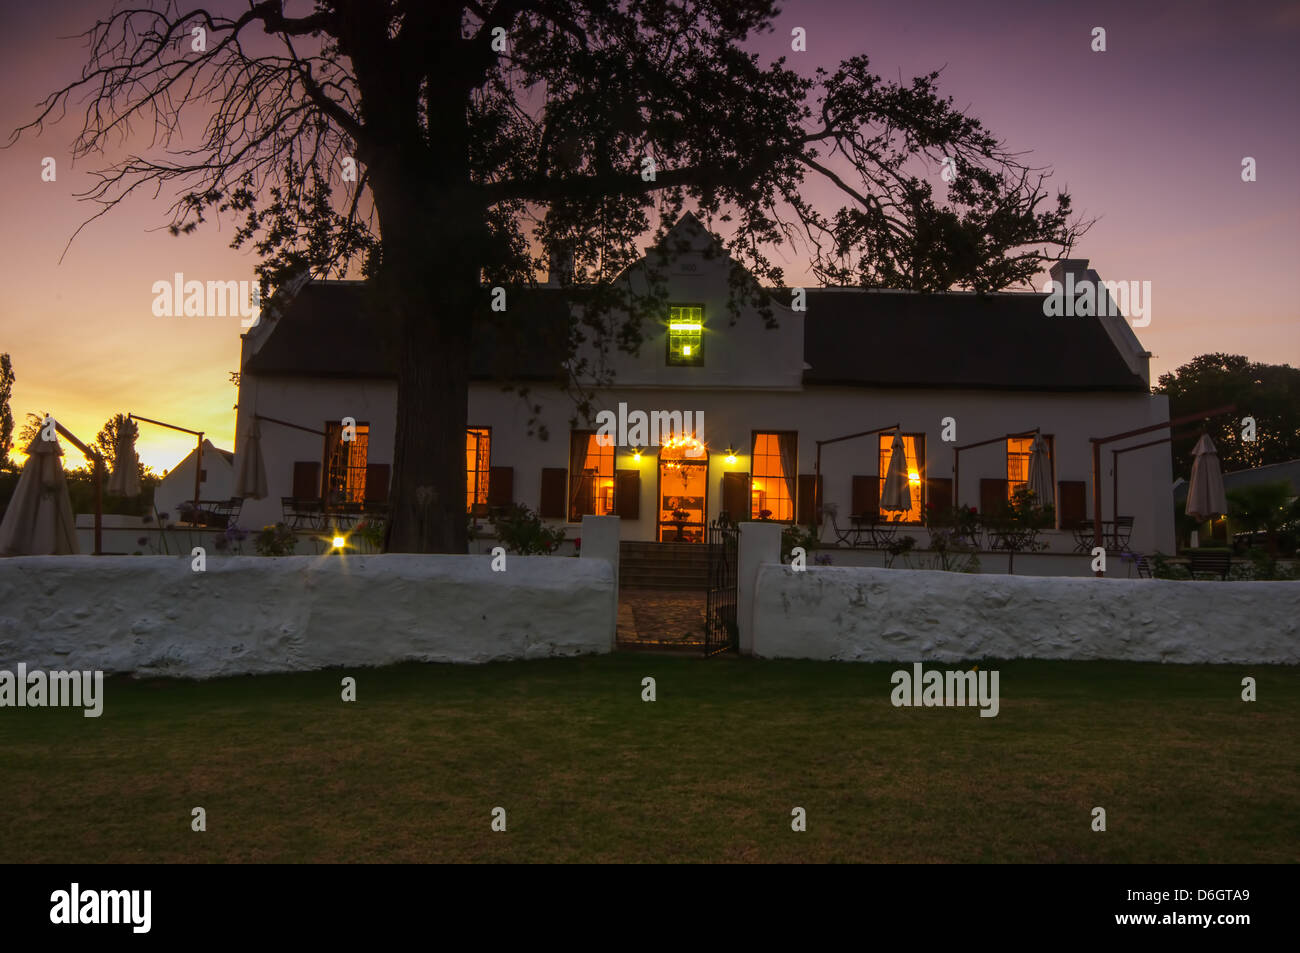 Night view of a building in dutch cape style in the region of stellenbosch, soiuth africa Stock Photo